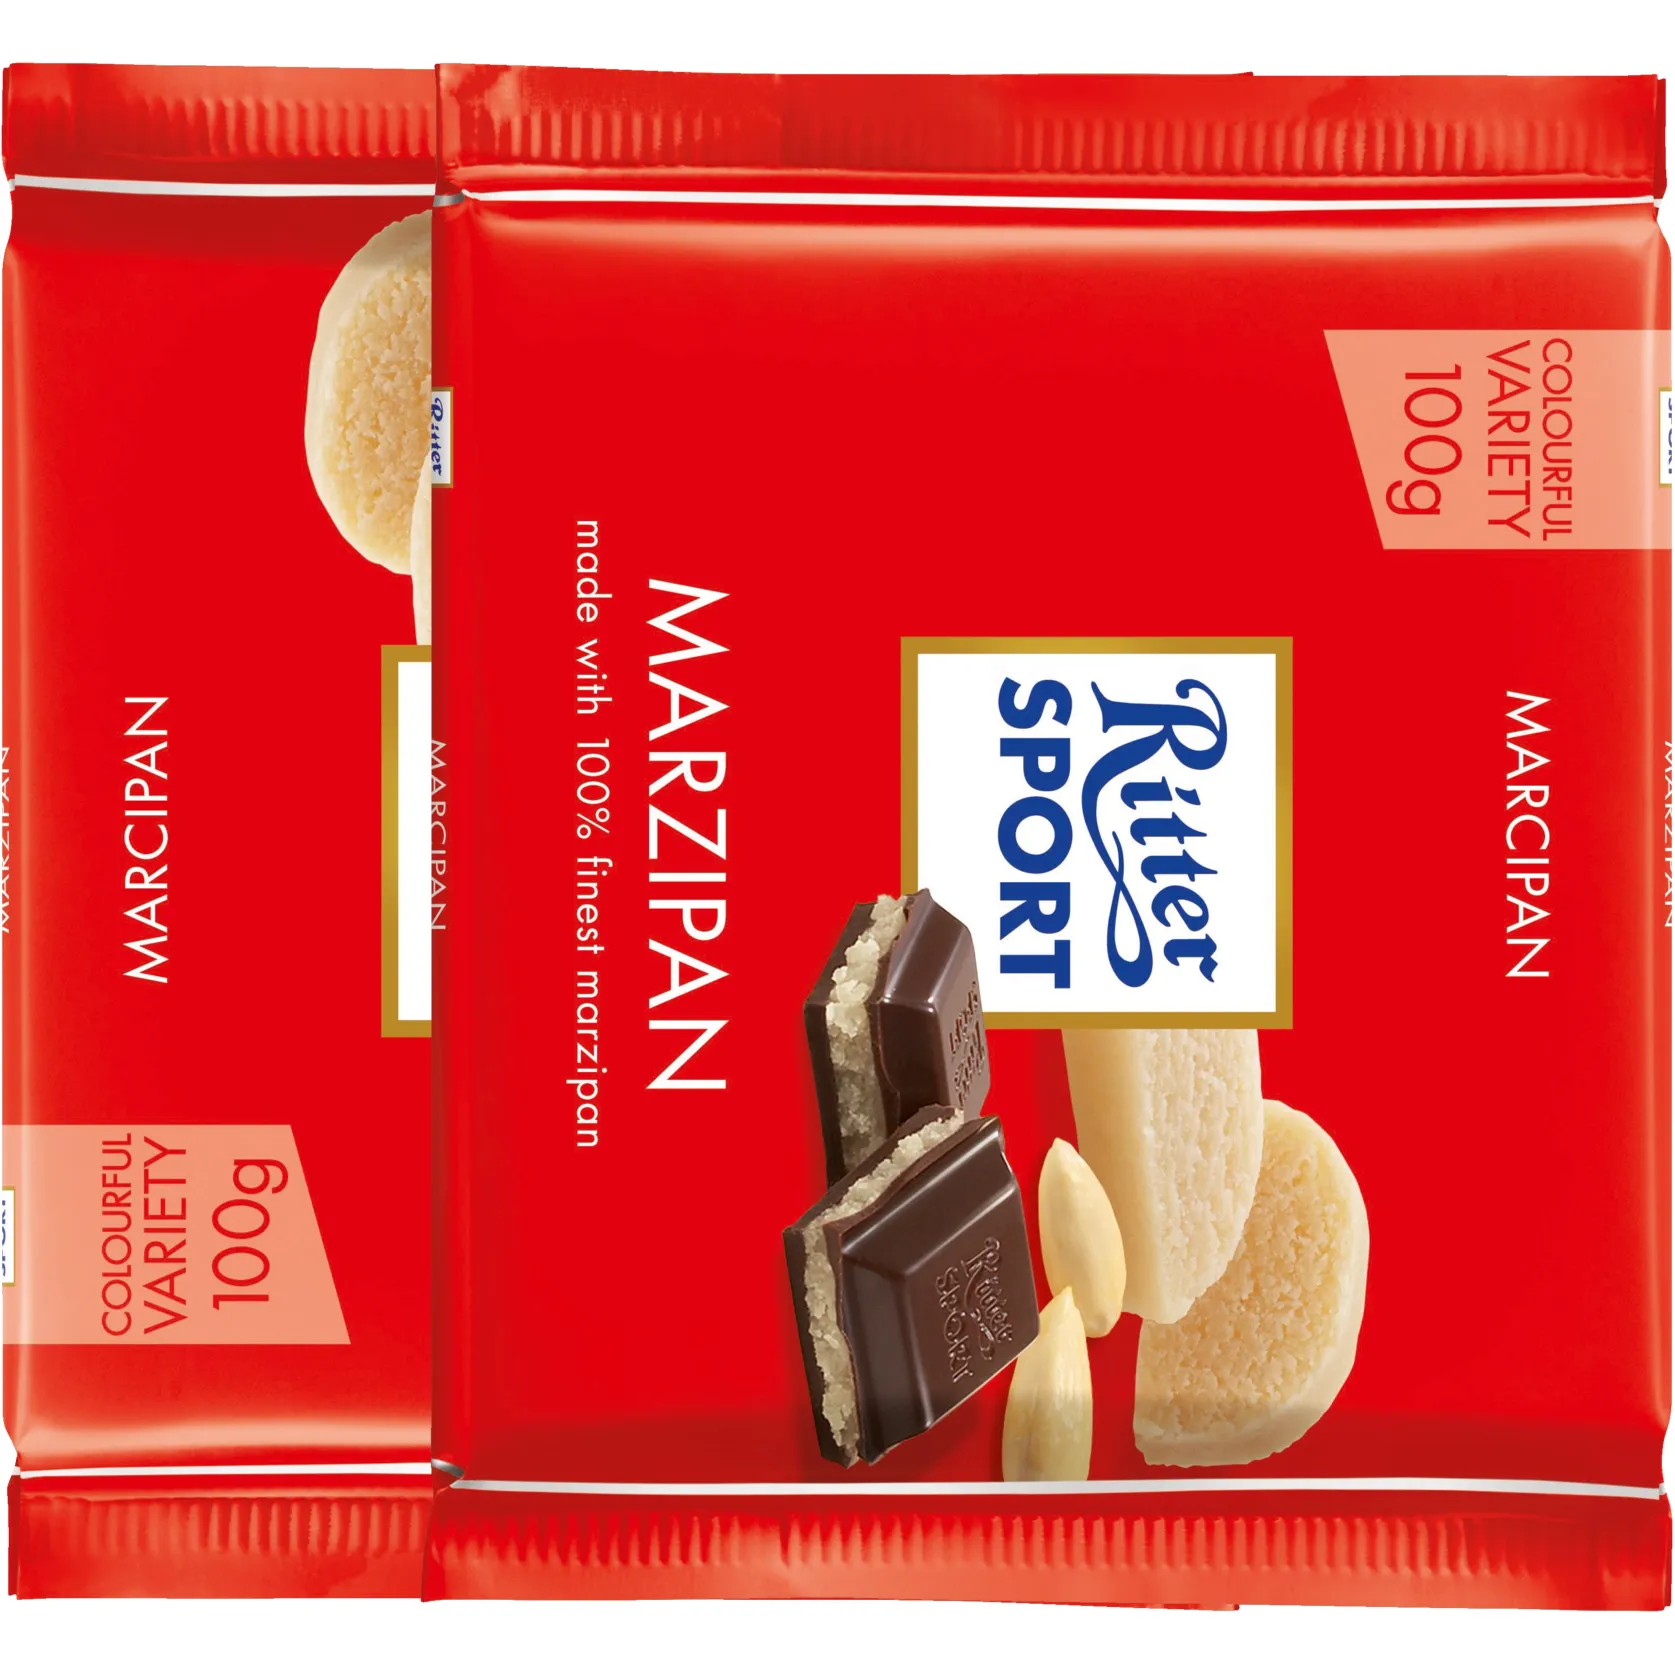 Free Ritter Sport Sustainably Made Chocolate